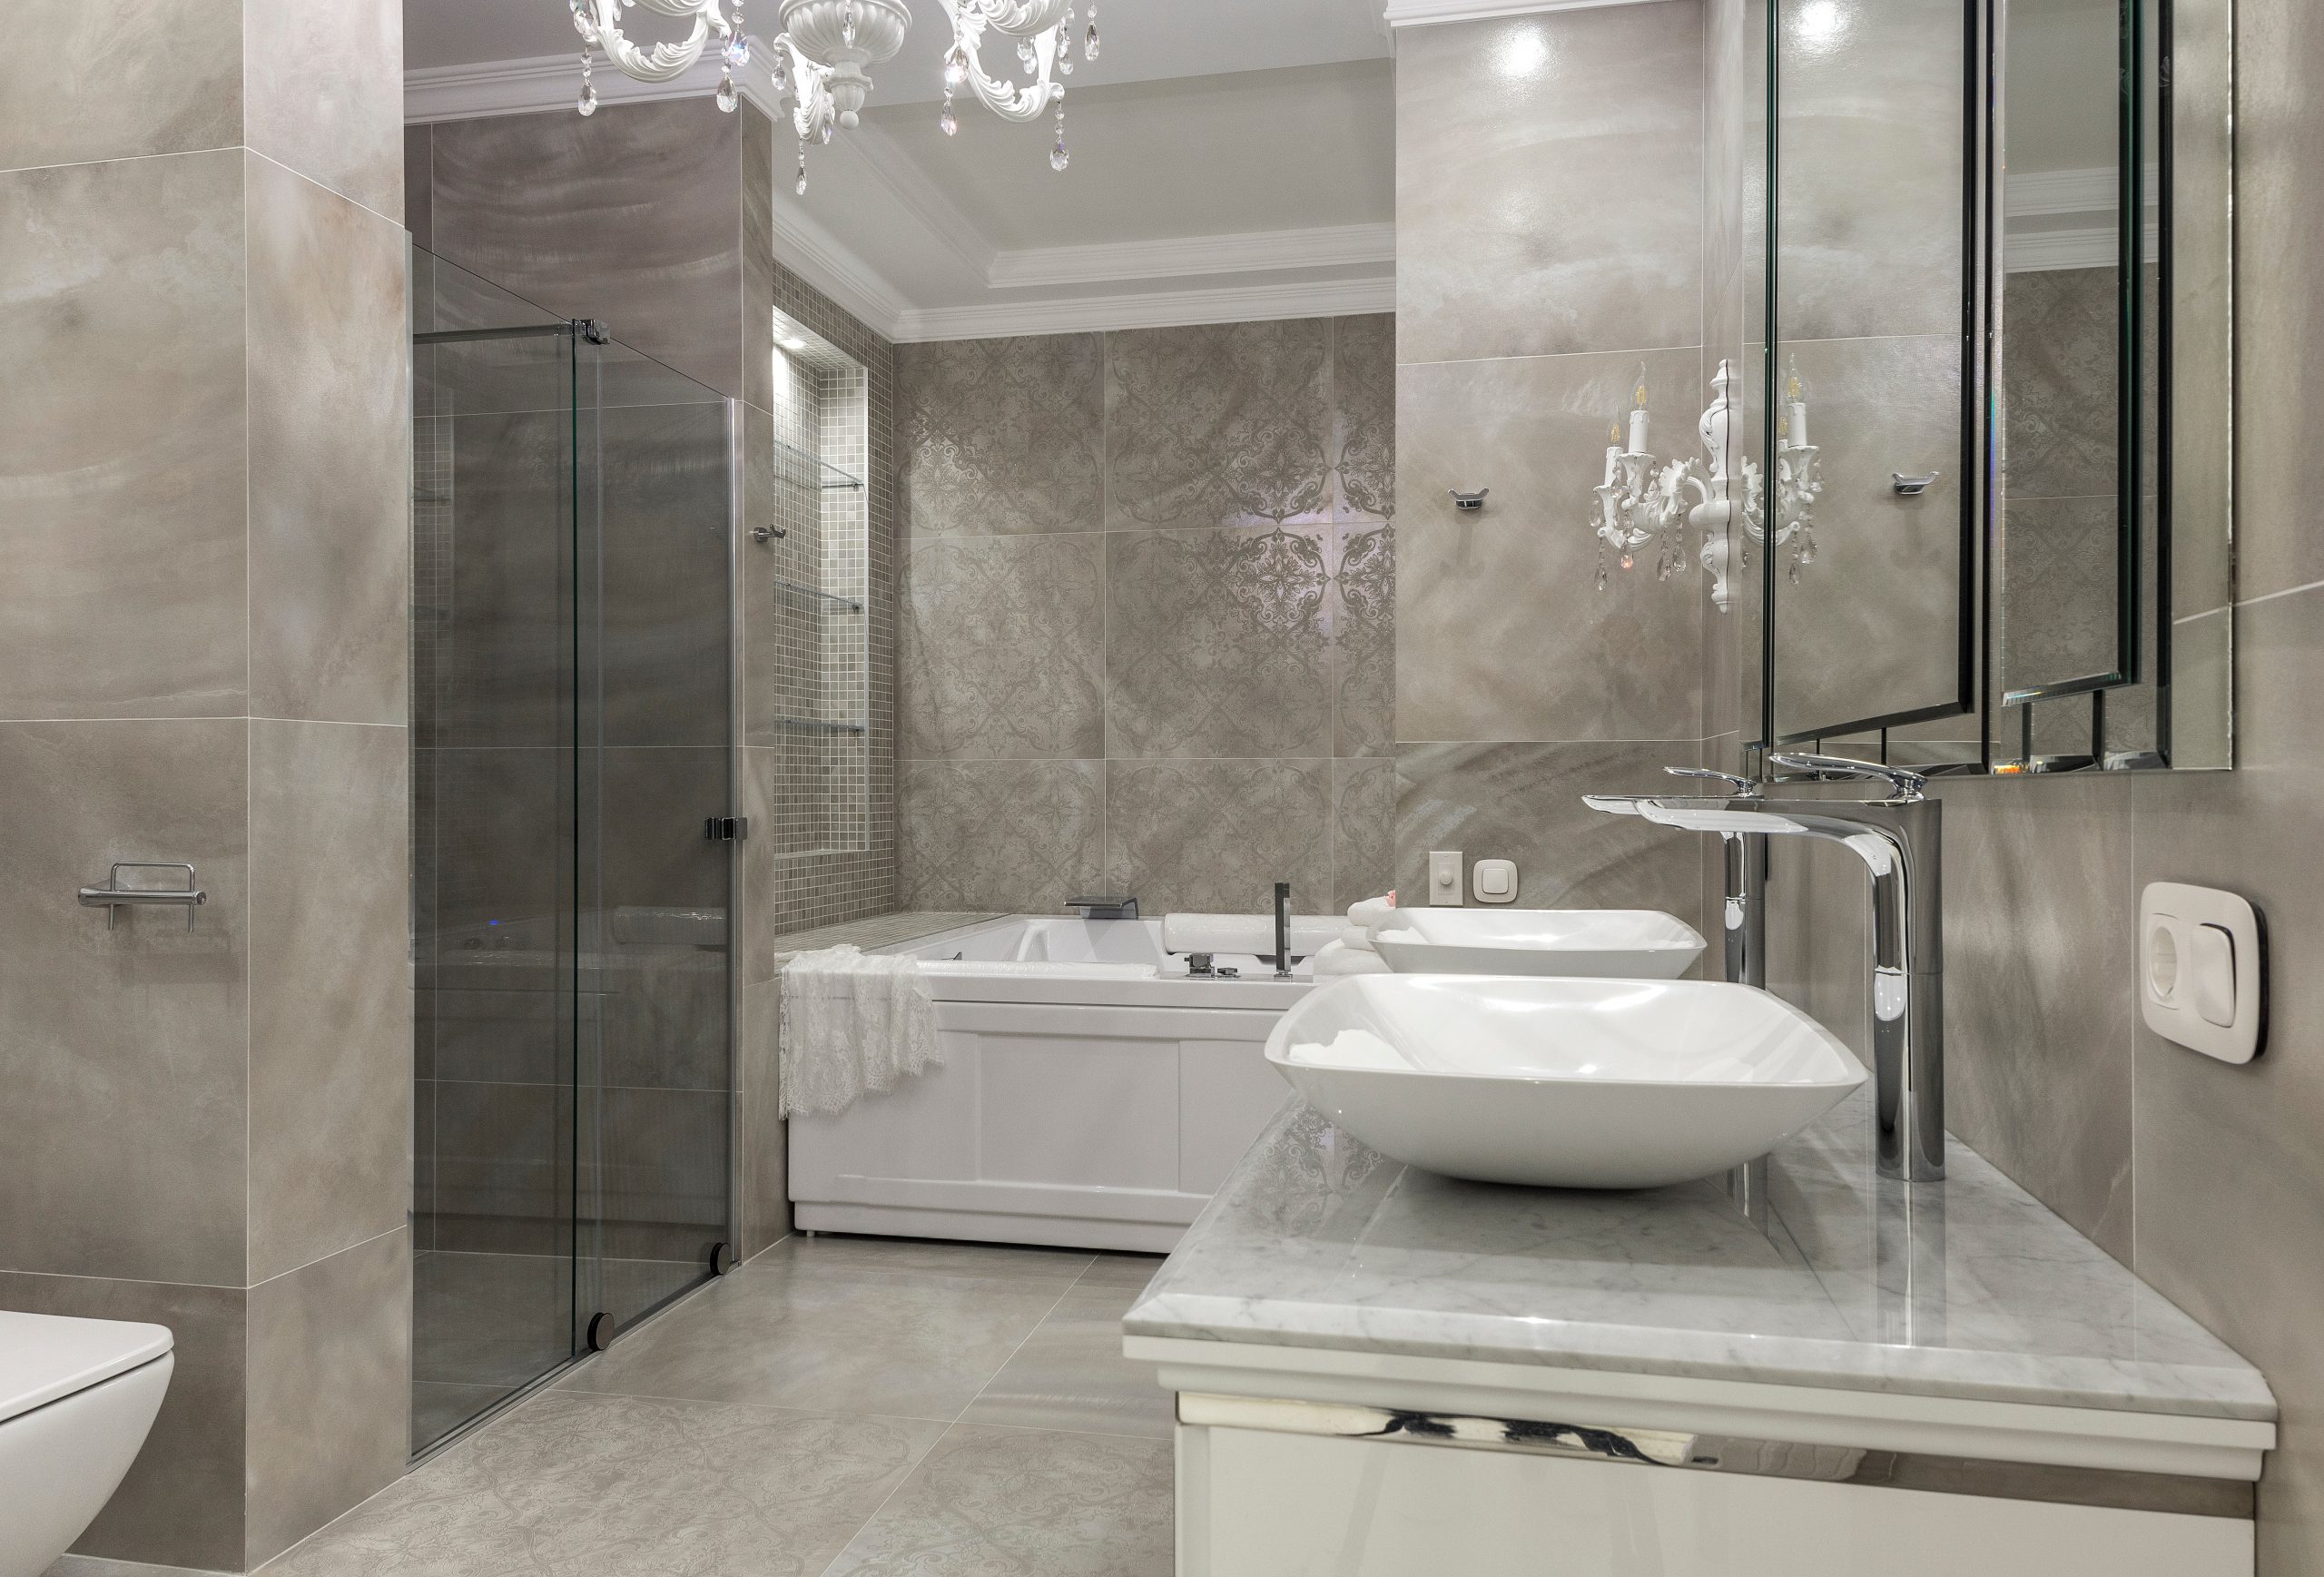 Our Favourite Features of a Designer Bathroom